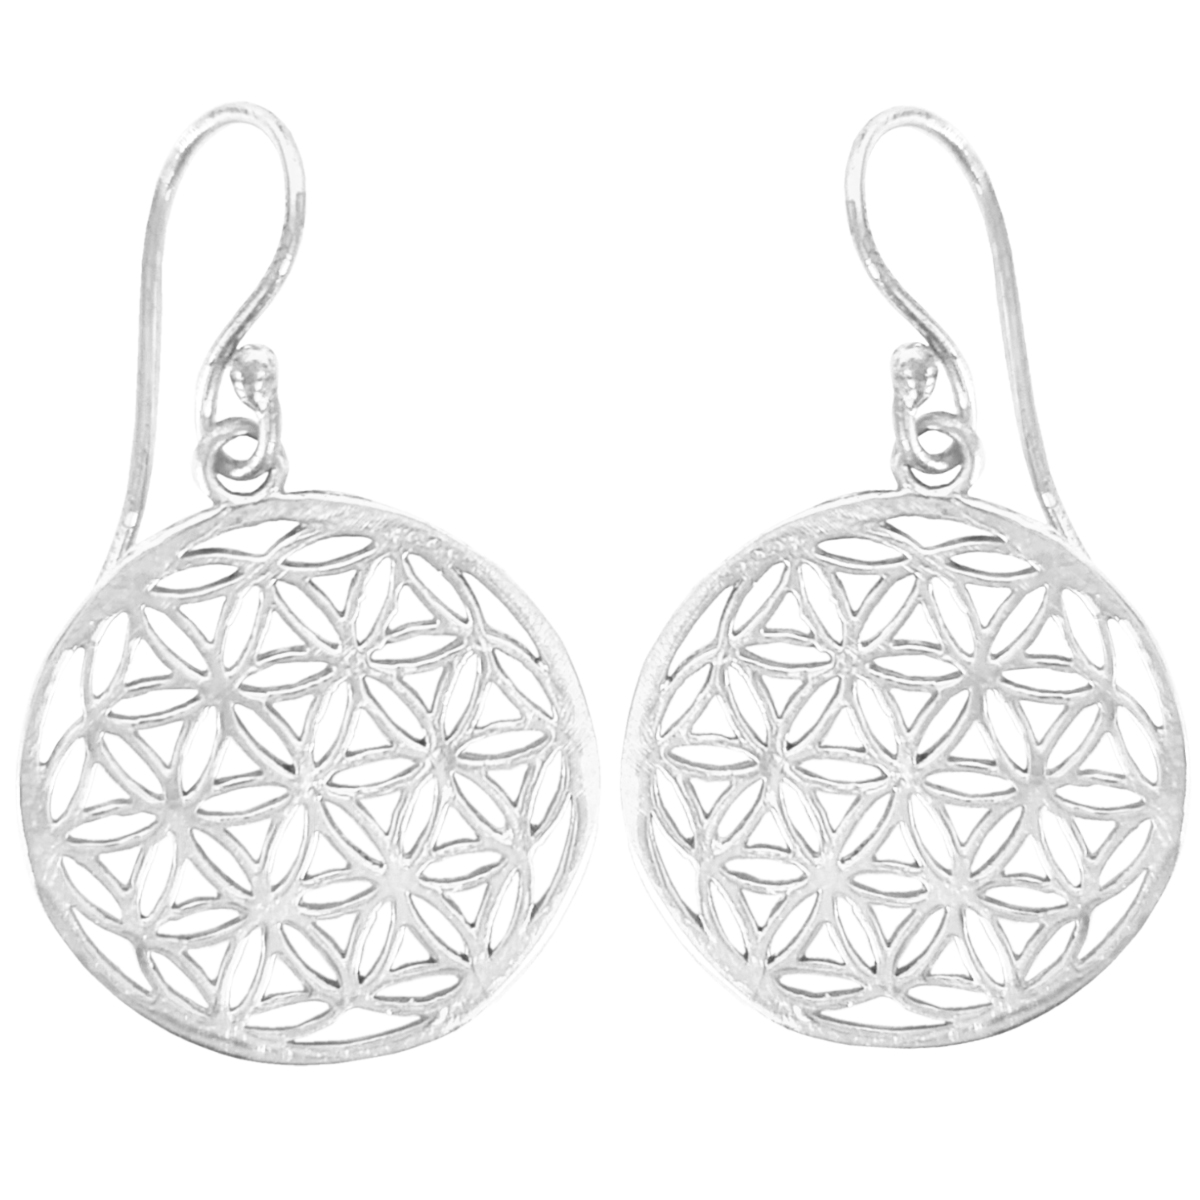 Flower of life earrings brass silver-colored